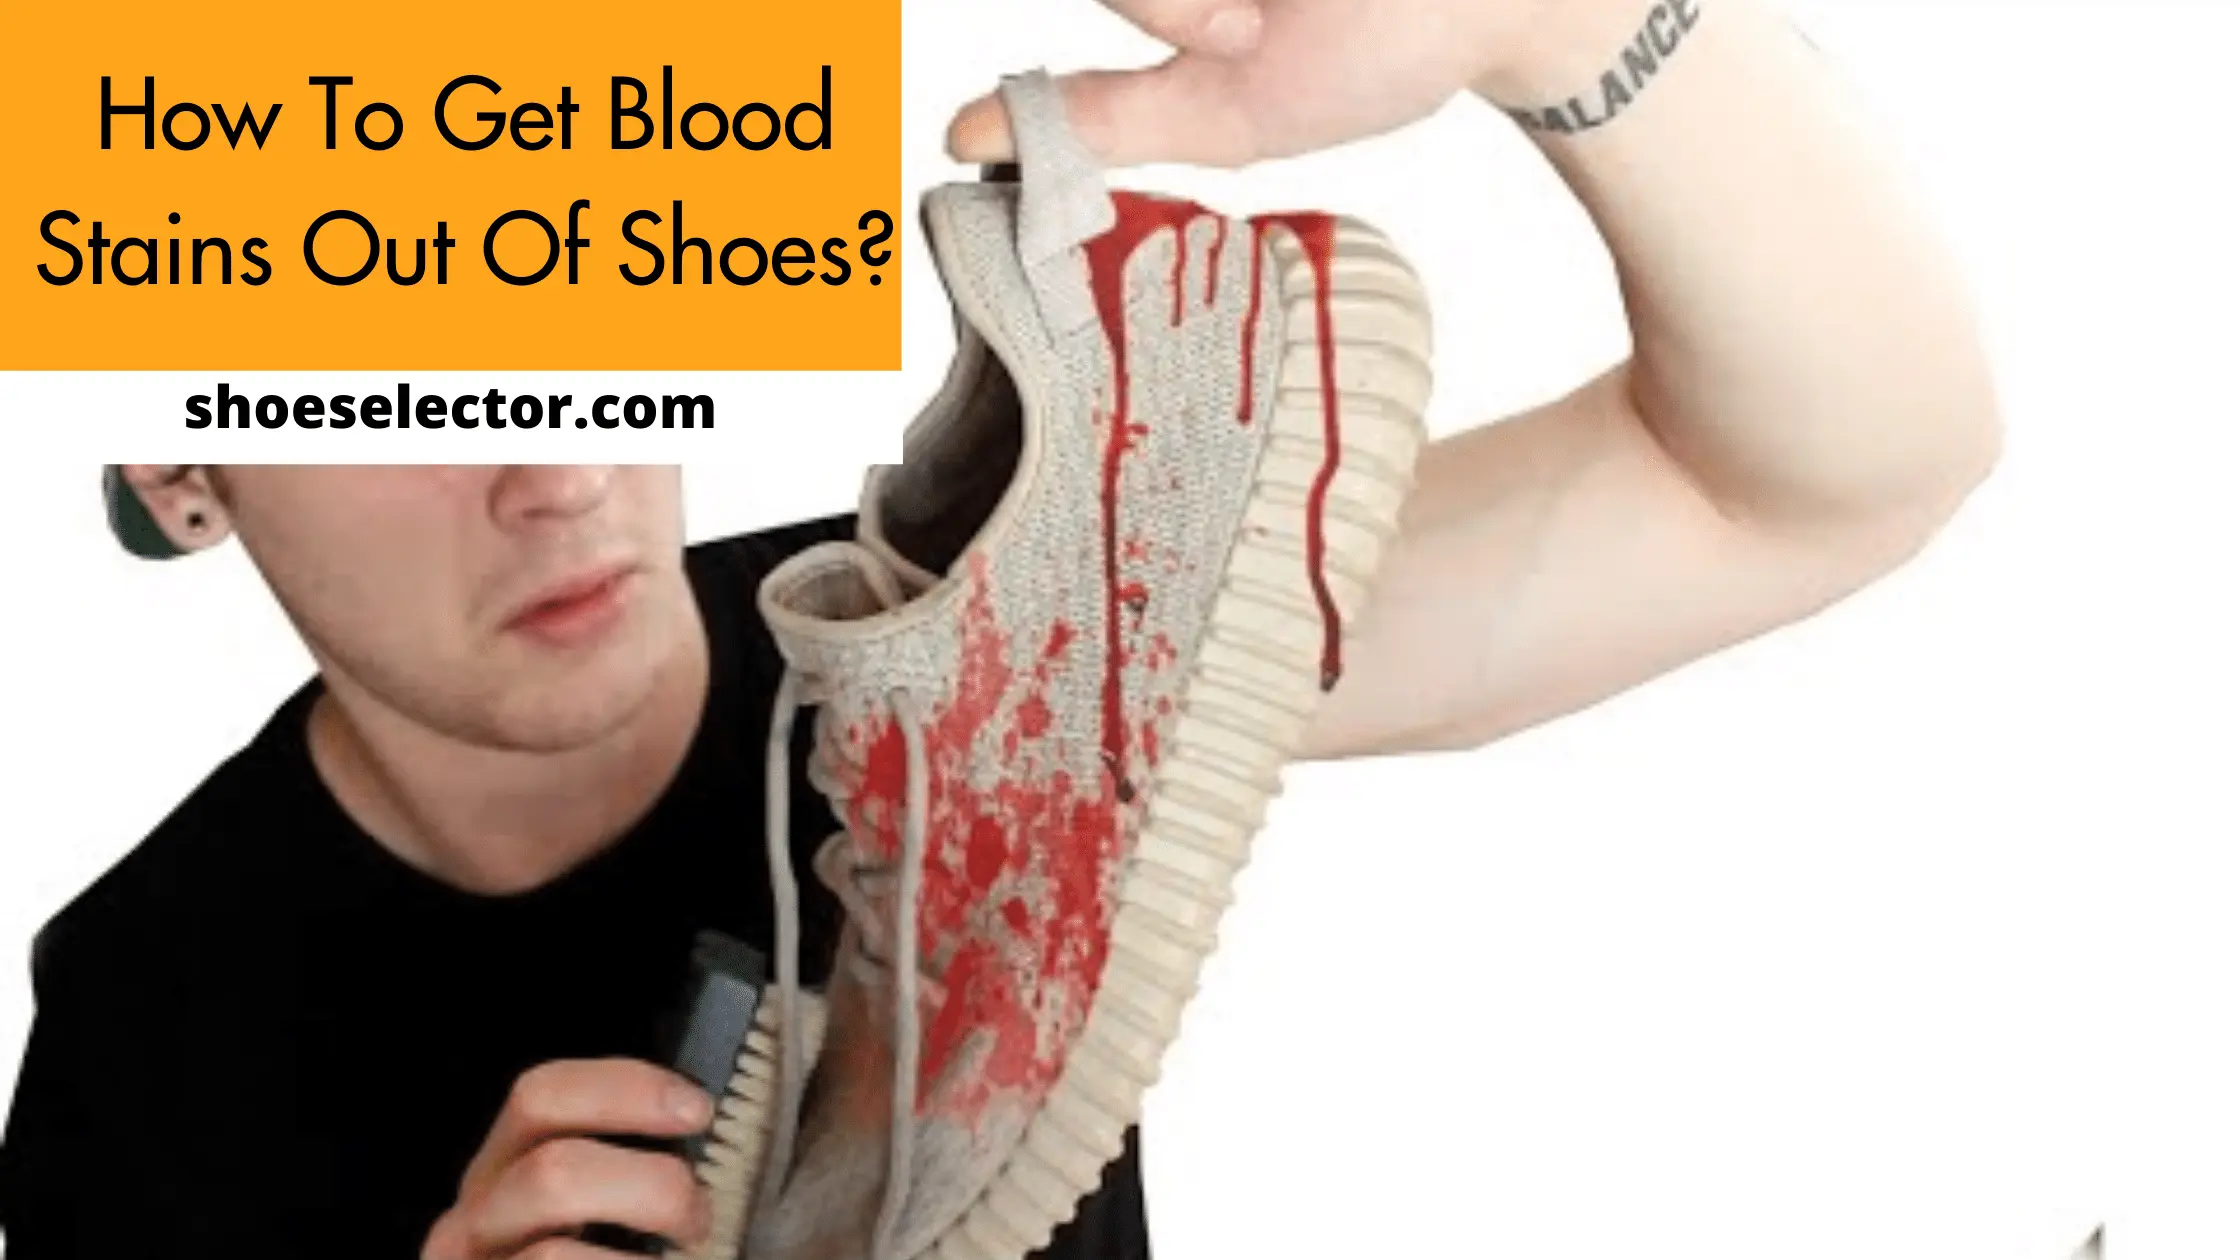 How to Get Blood Stains Out of Shoes? - Latest Guide